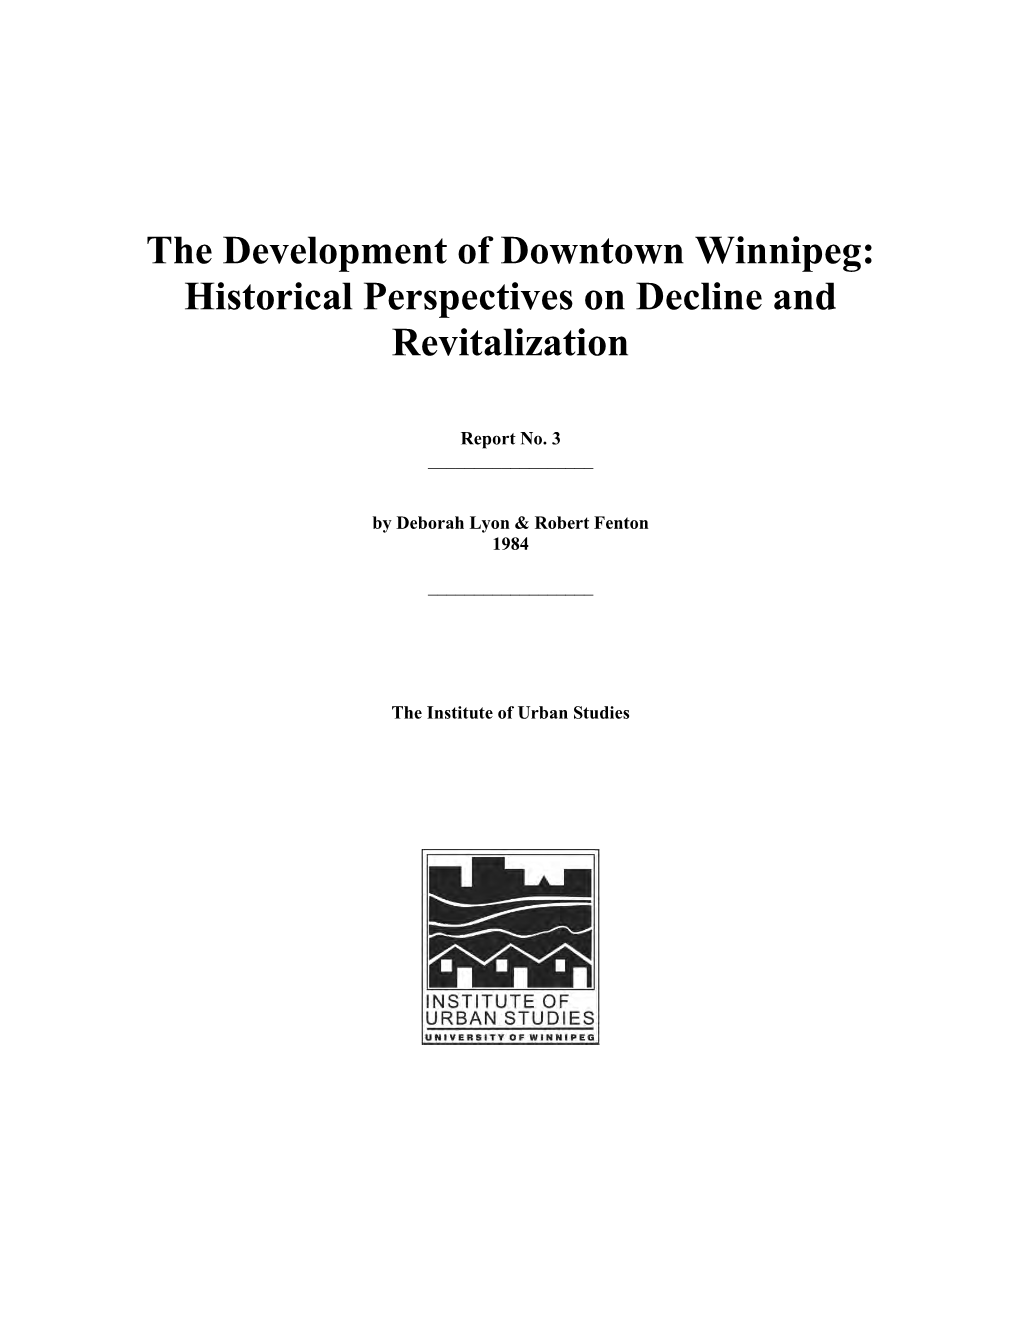 The Development of Downtown Winnipeg: Historical Perspectives on Decline and Revitalization